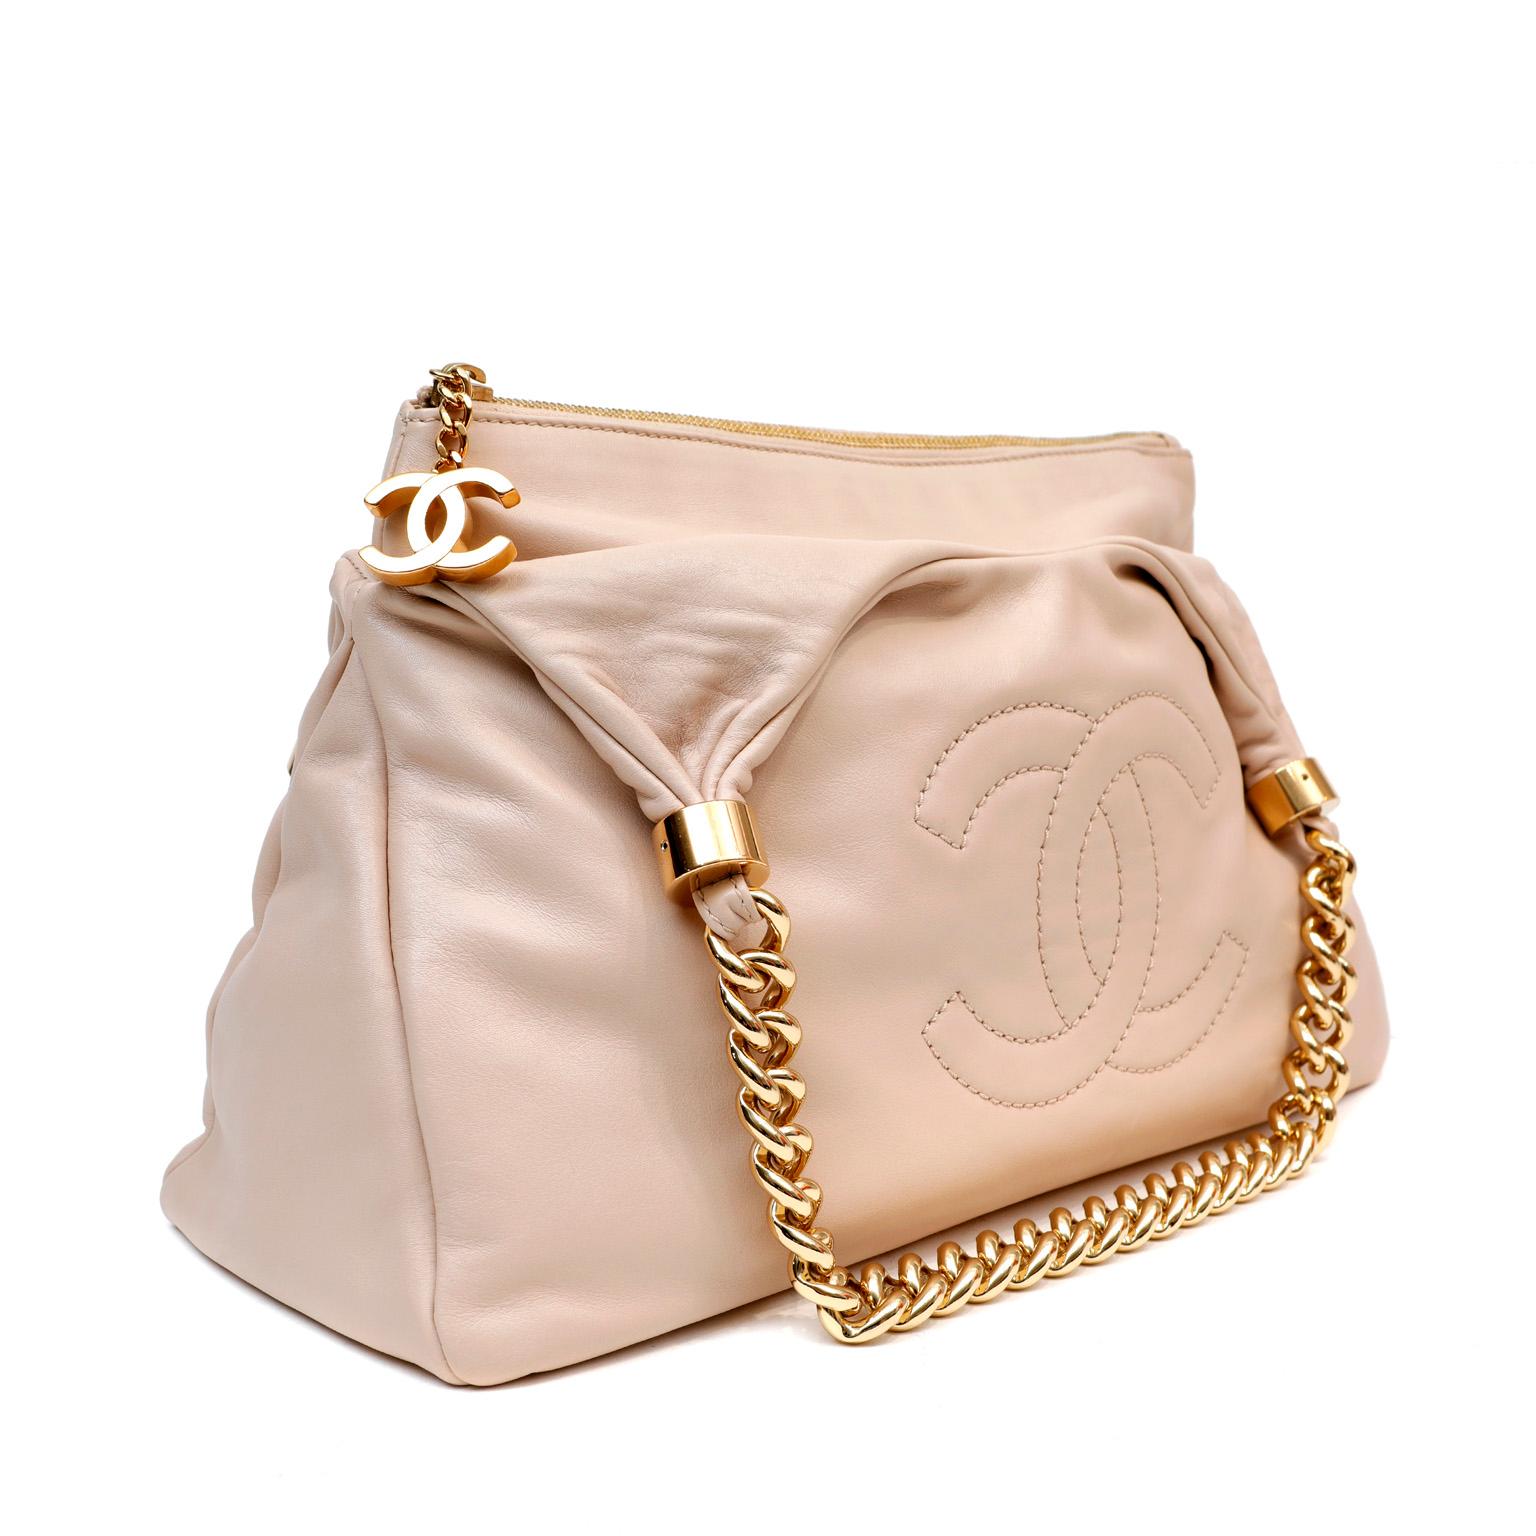 This authentic Chanel Beige Lambskin Rodeo Drive Hobo is in pristine condition.  Substantial chunky chain details and a spacious silhouette make this a perfect everyday bag for year-round enjoyment.  Supple beige lambskin hobo with large